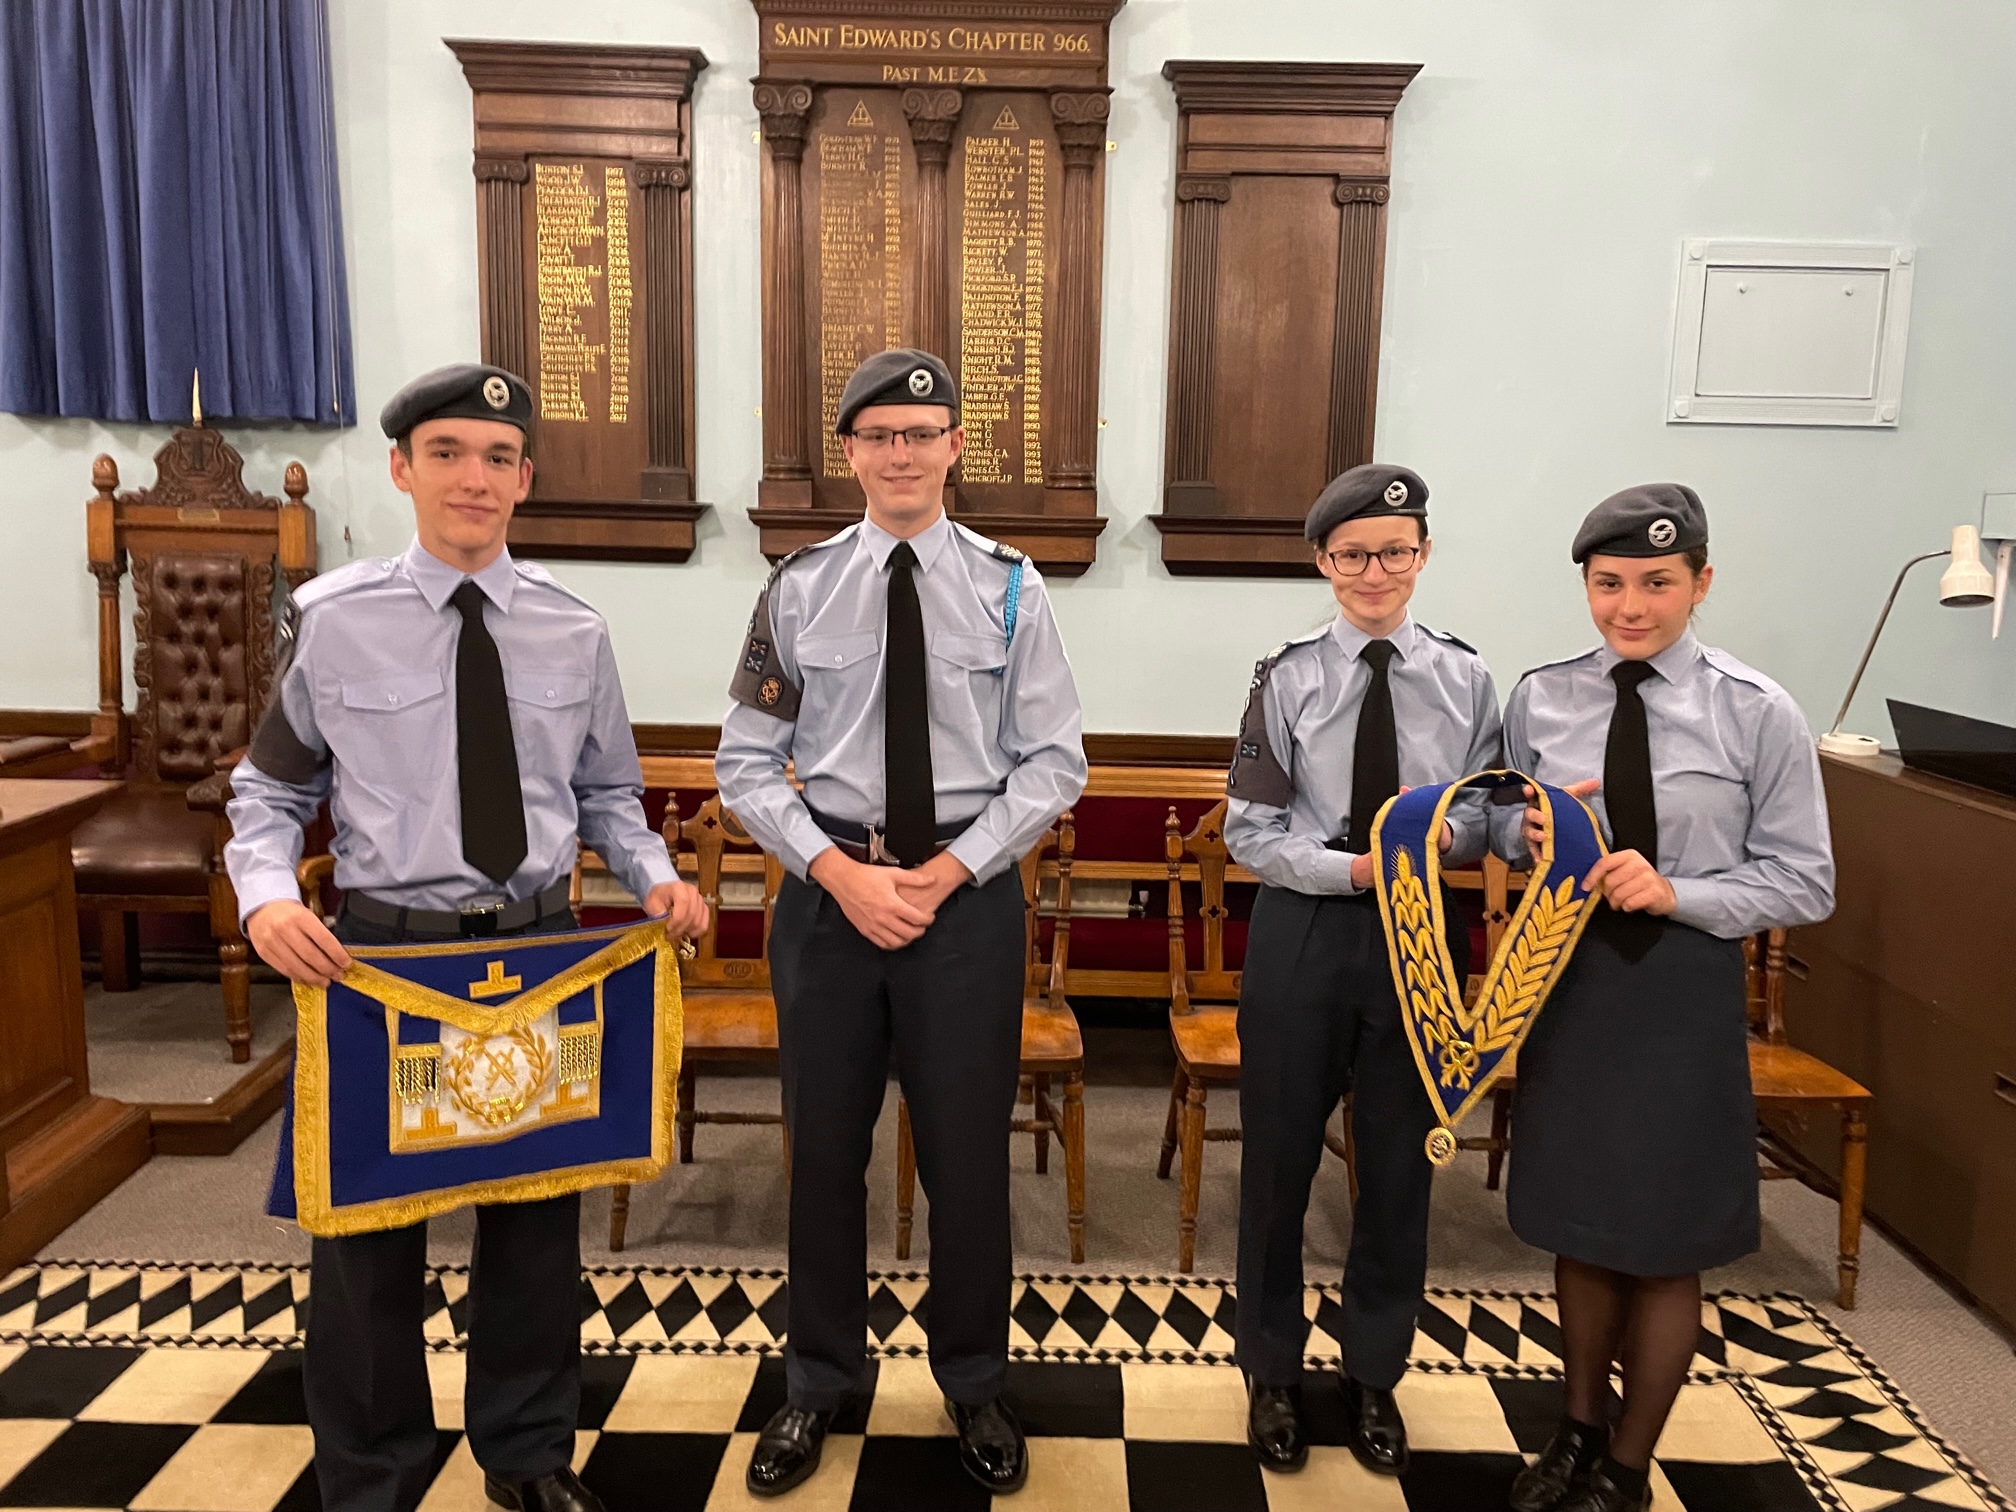 Members of 60 Leek Squadron Air Cadets enjoy a visit to the Masonic Lodge in Leek, Staffordshire and stand together holding masonic regalia